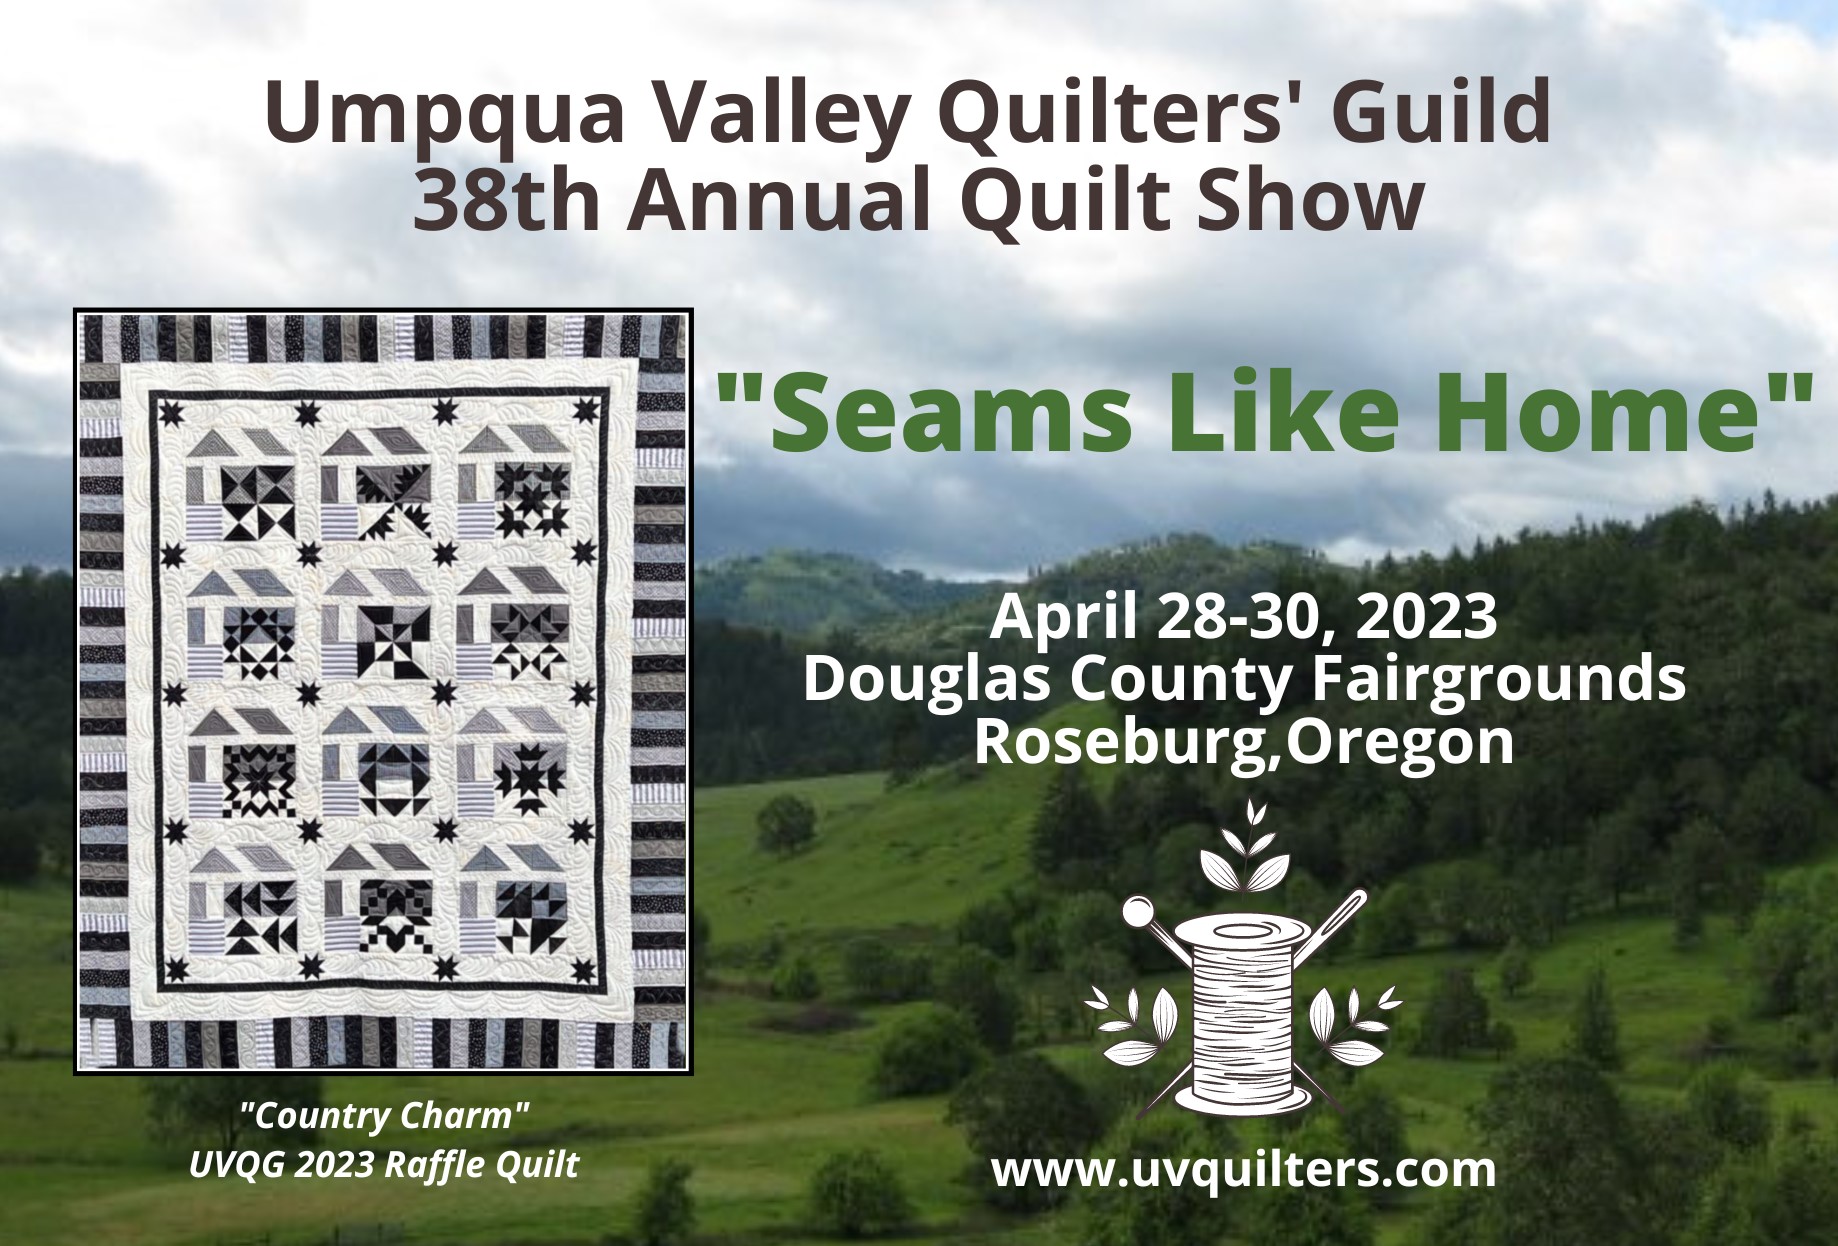 quilt show details with country charm raffle quilt image